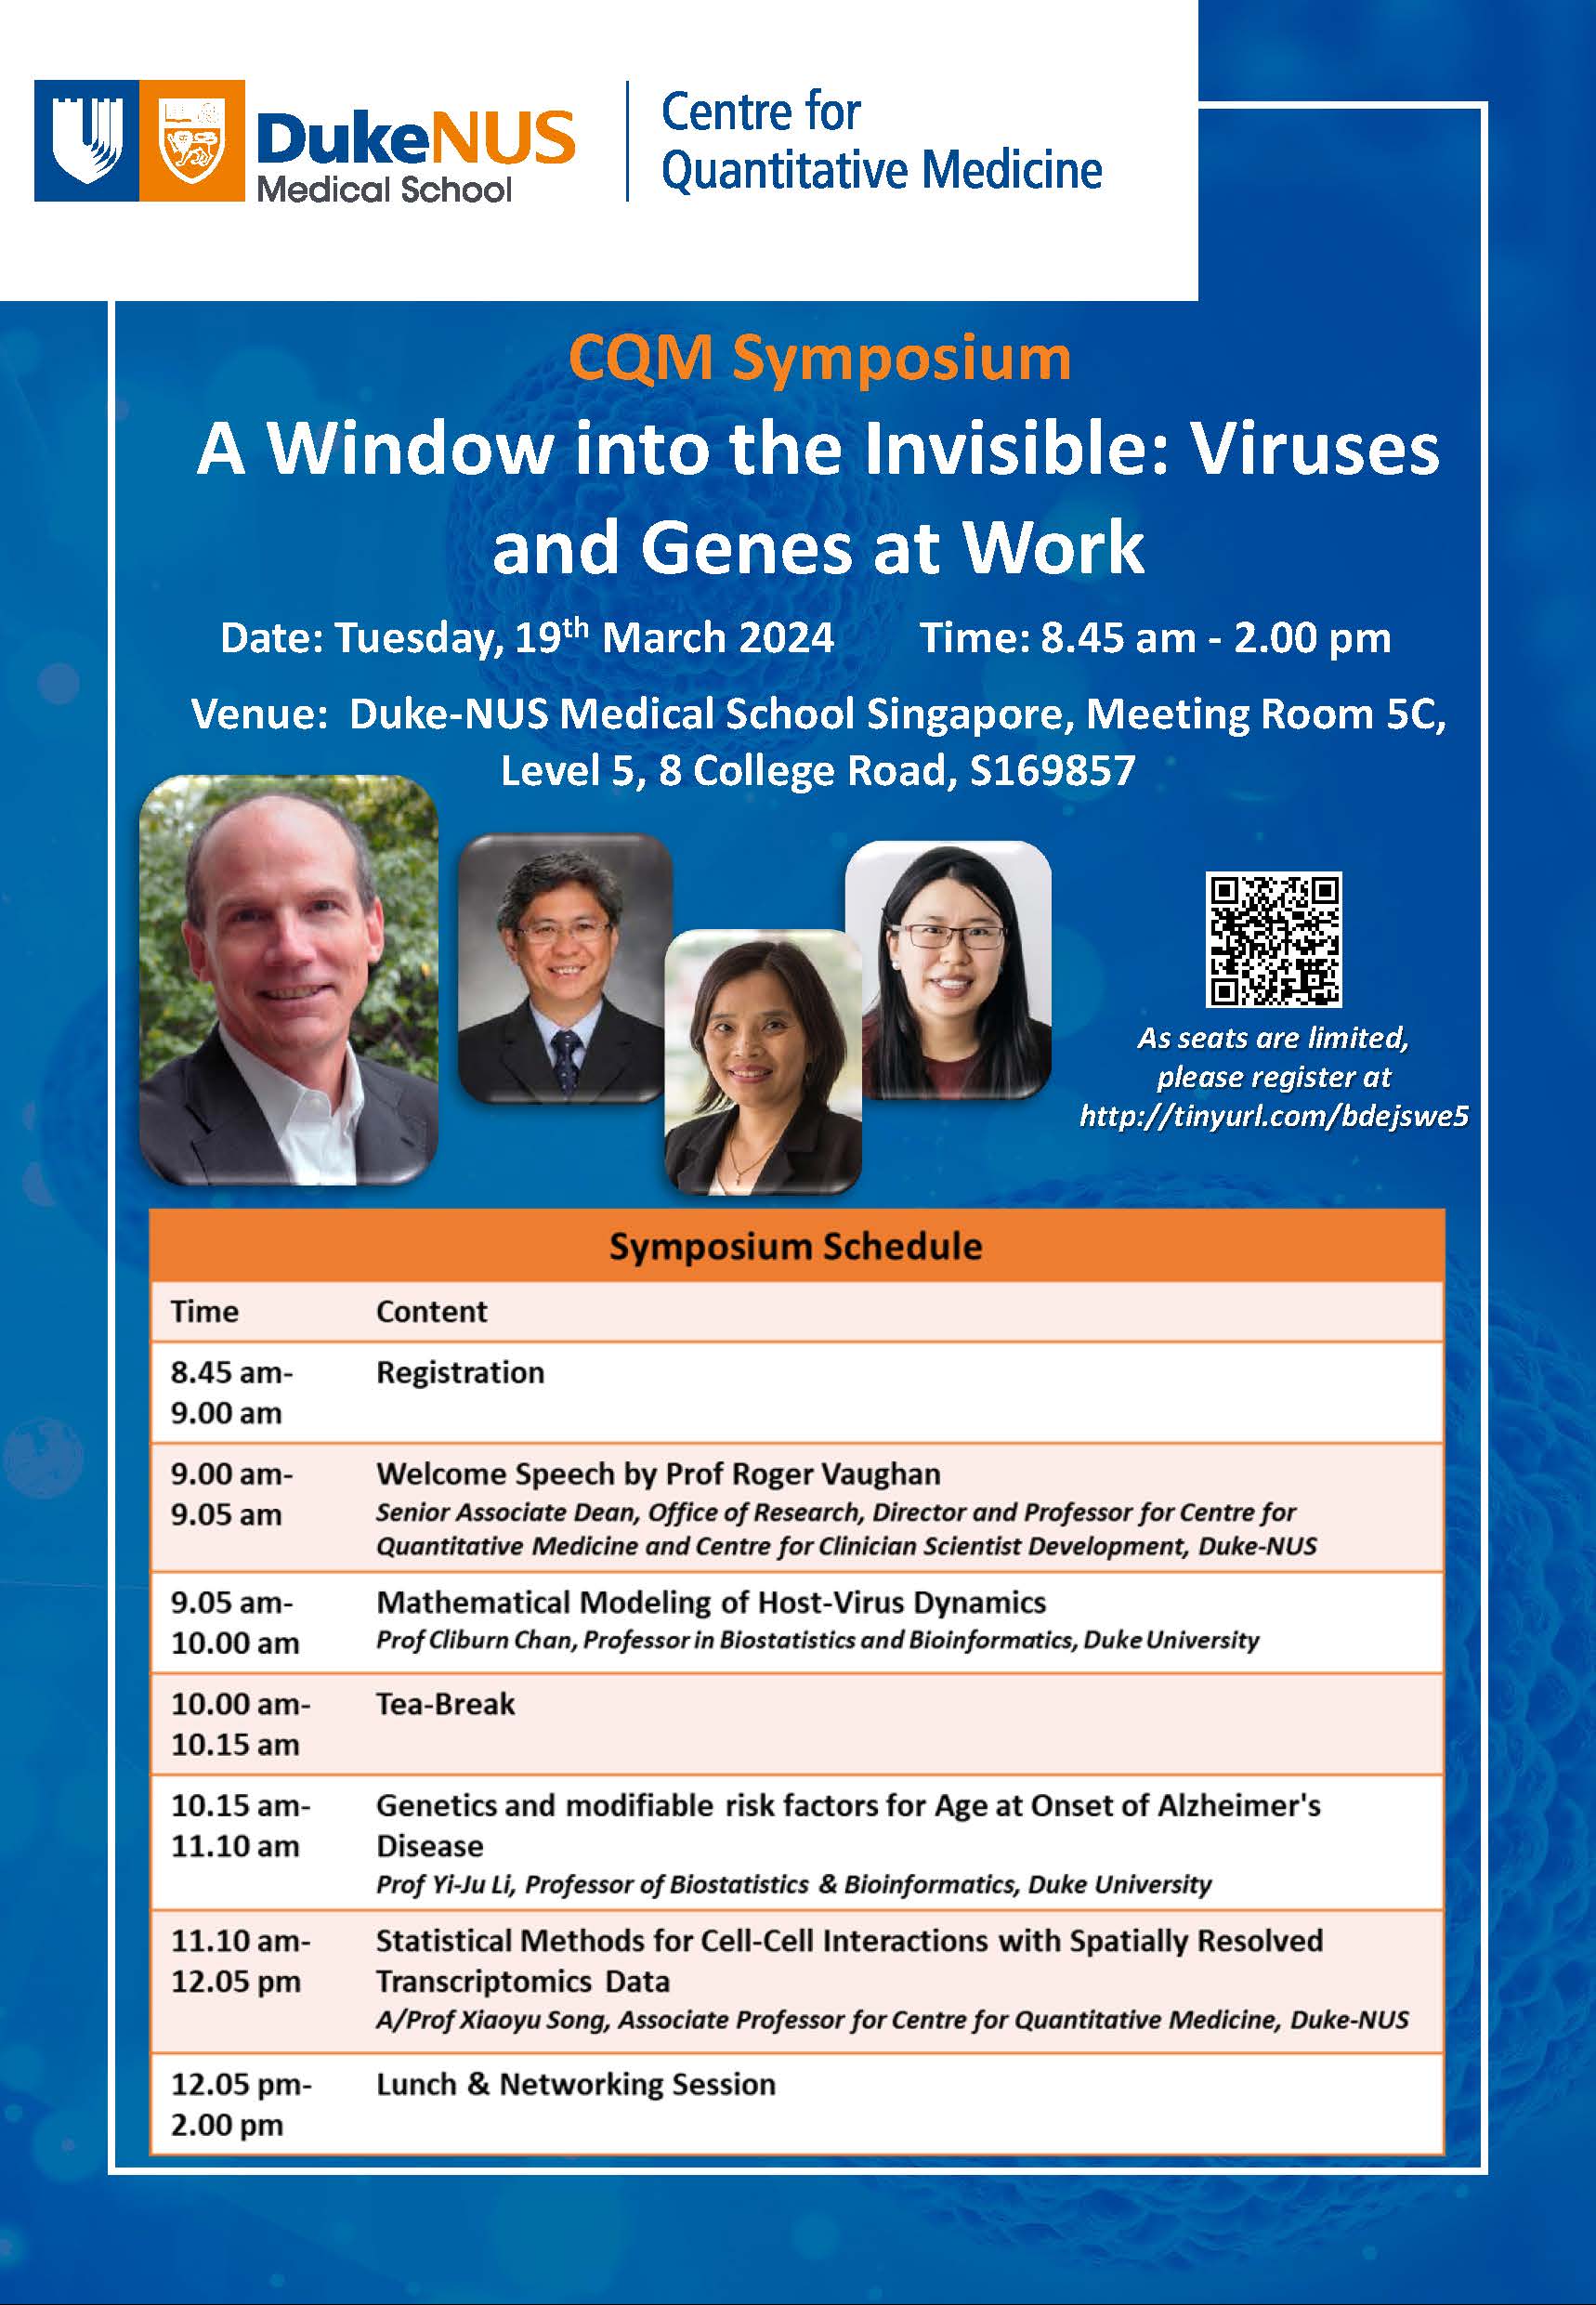 CQM Symposium: A Window into the Invisible: Viruses and Genes at Work